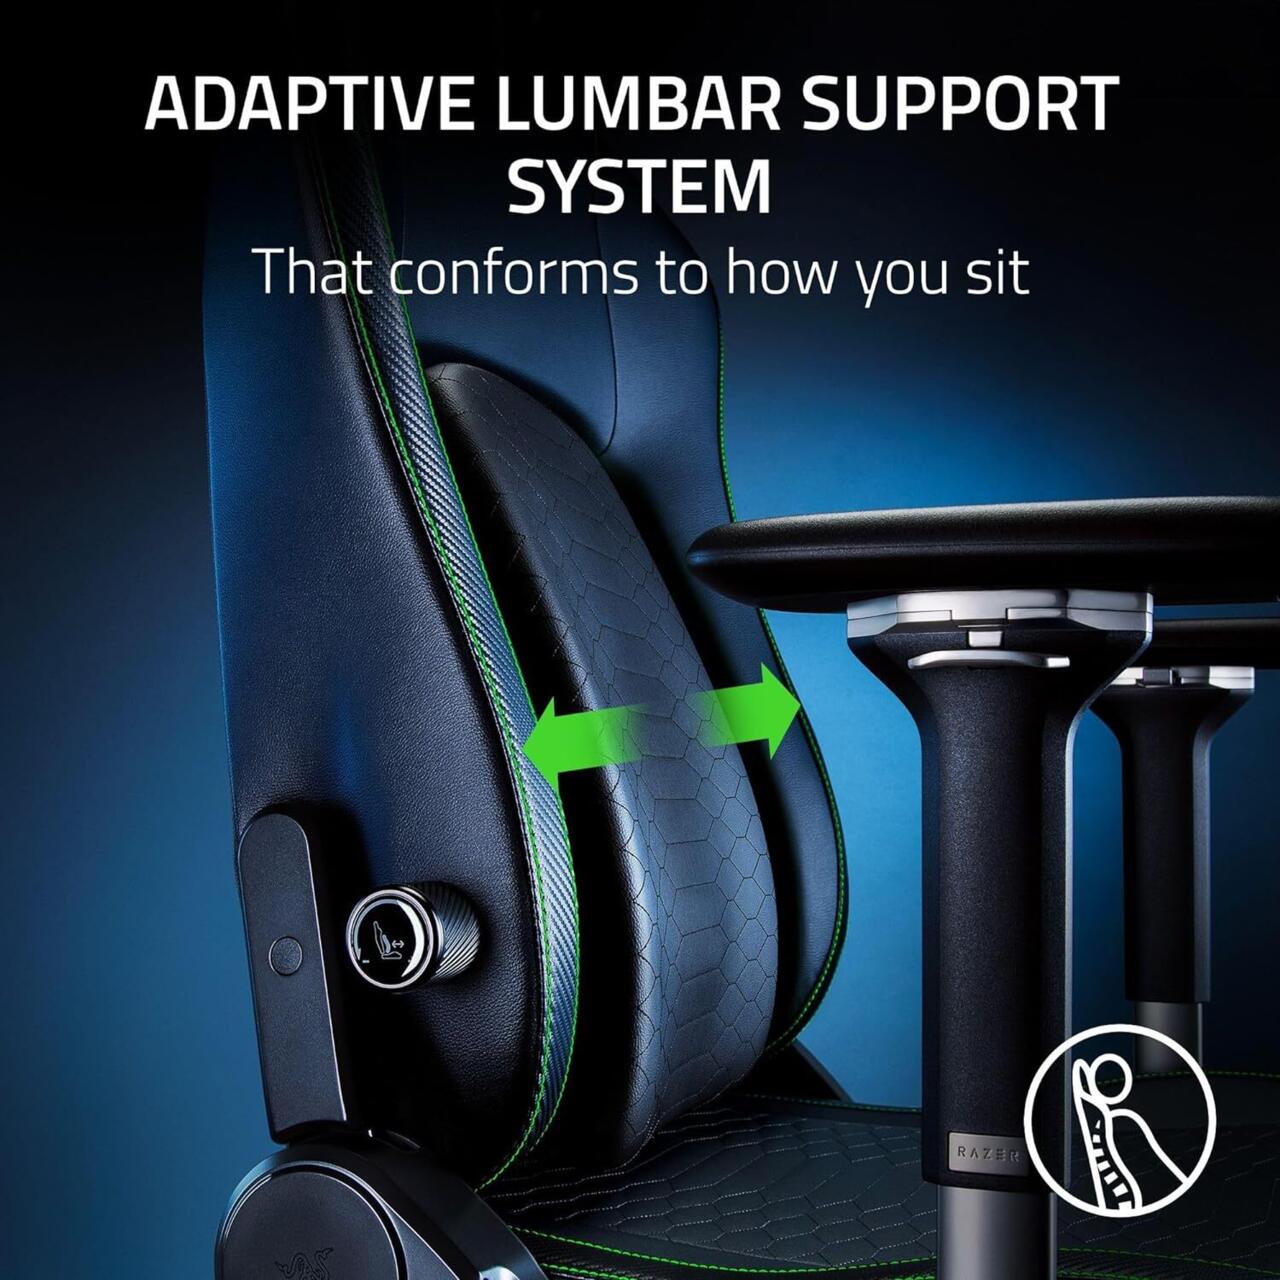 The Razer Iskur V2's adaptive lumbar support is the key feature.